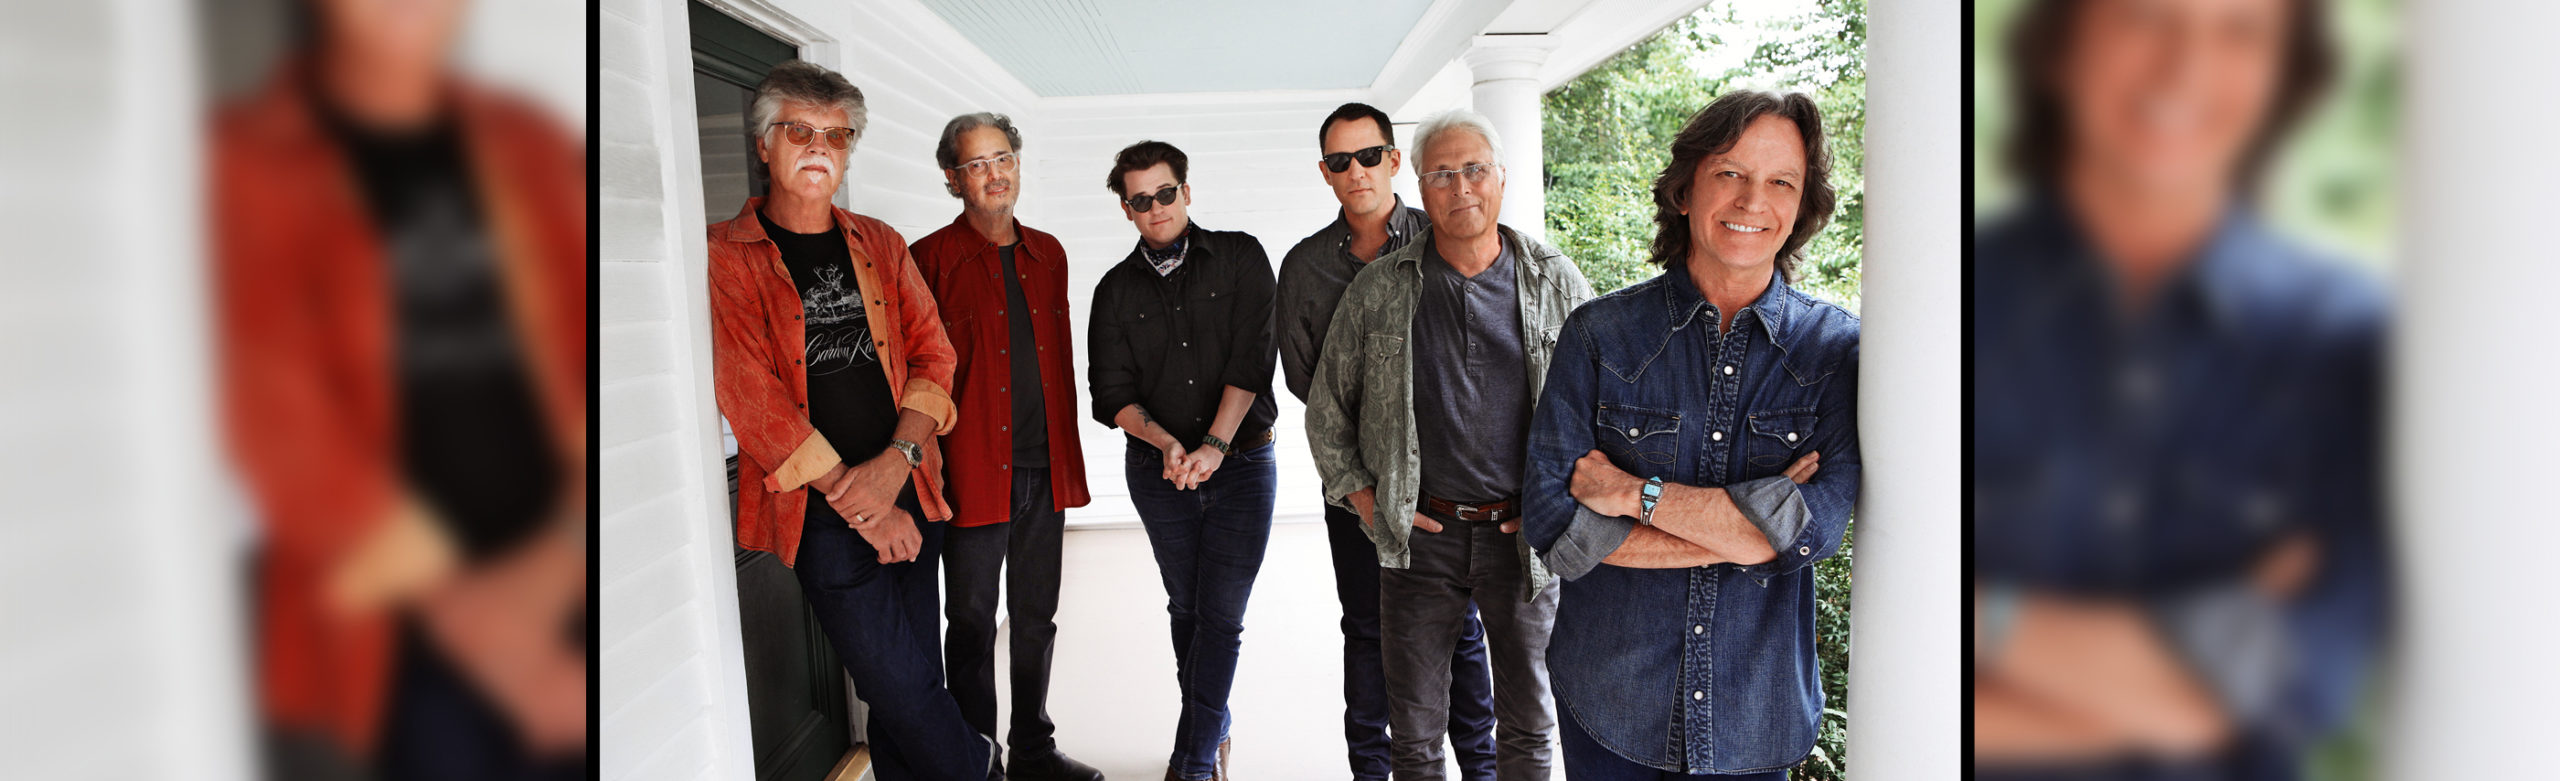 Nitty Gritty Dirt Band Meet & Greet Giveaway Image